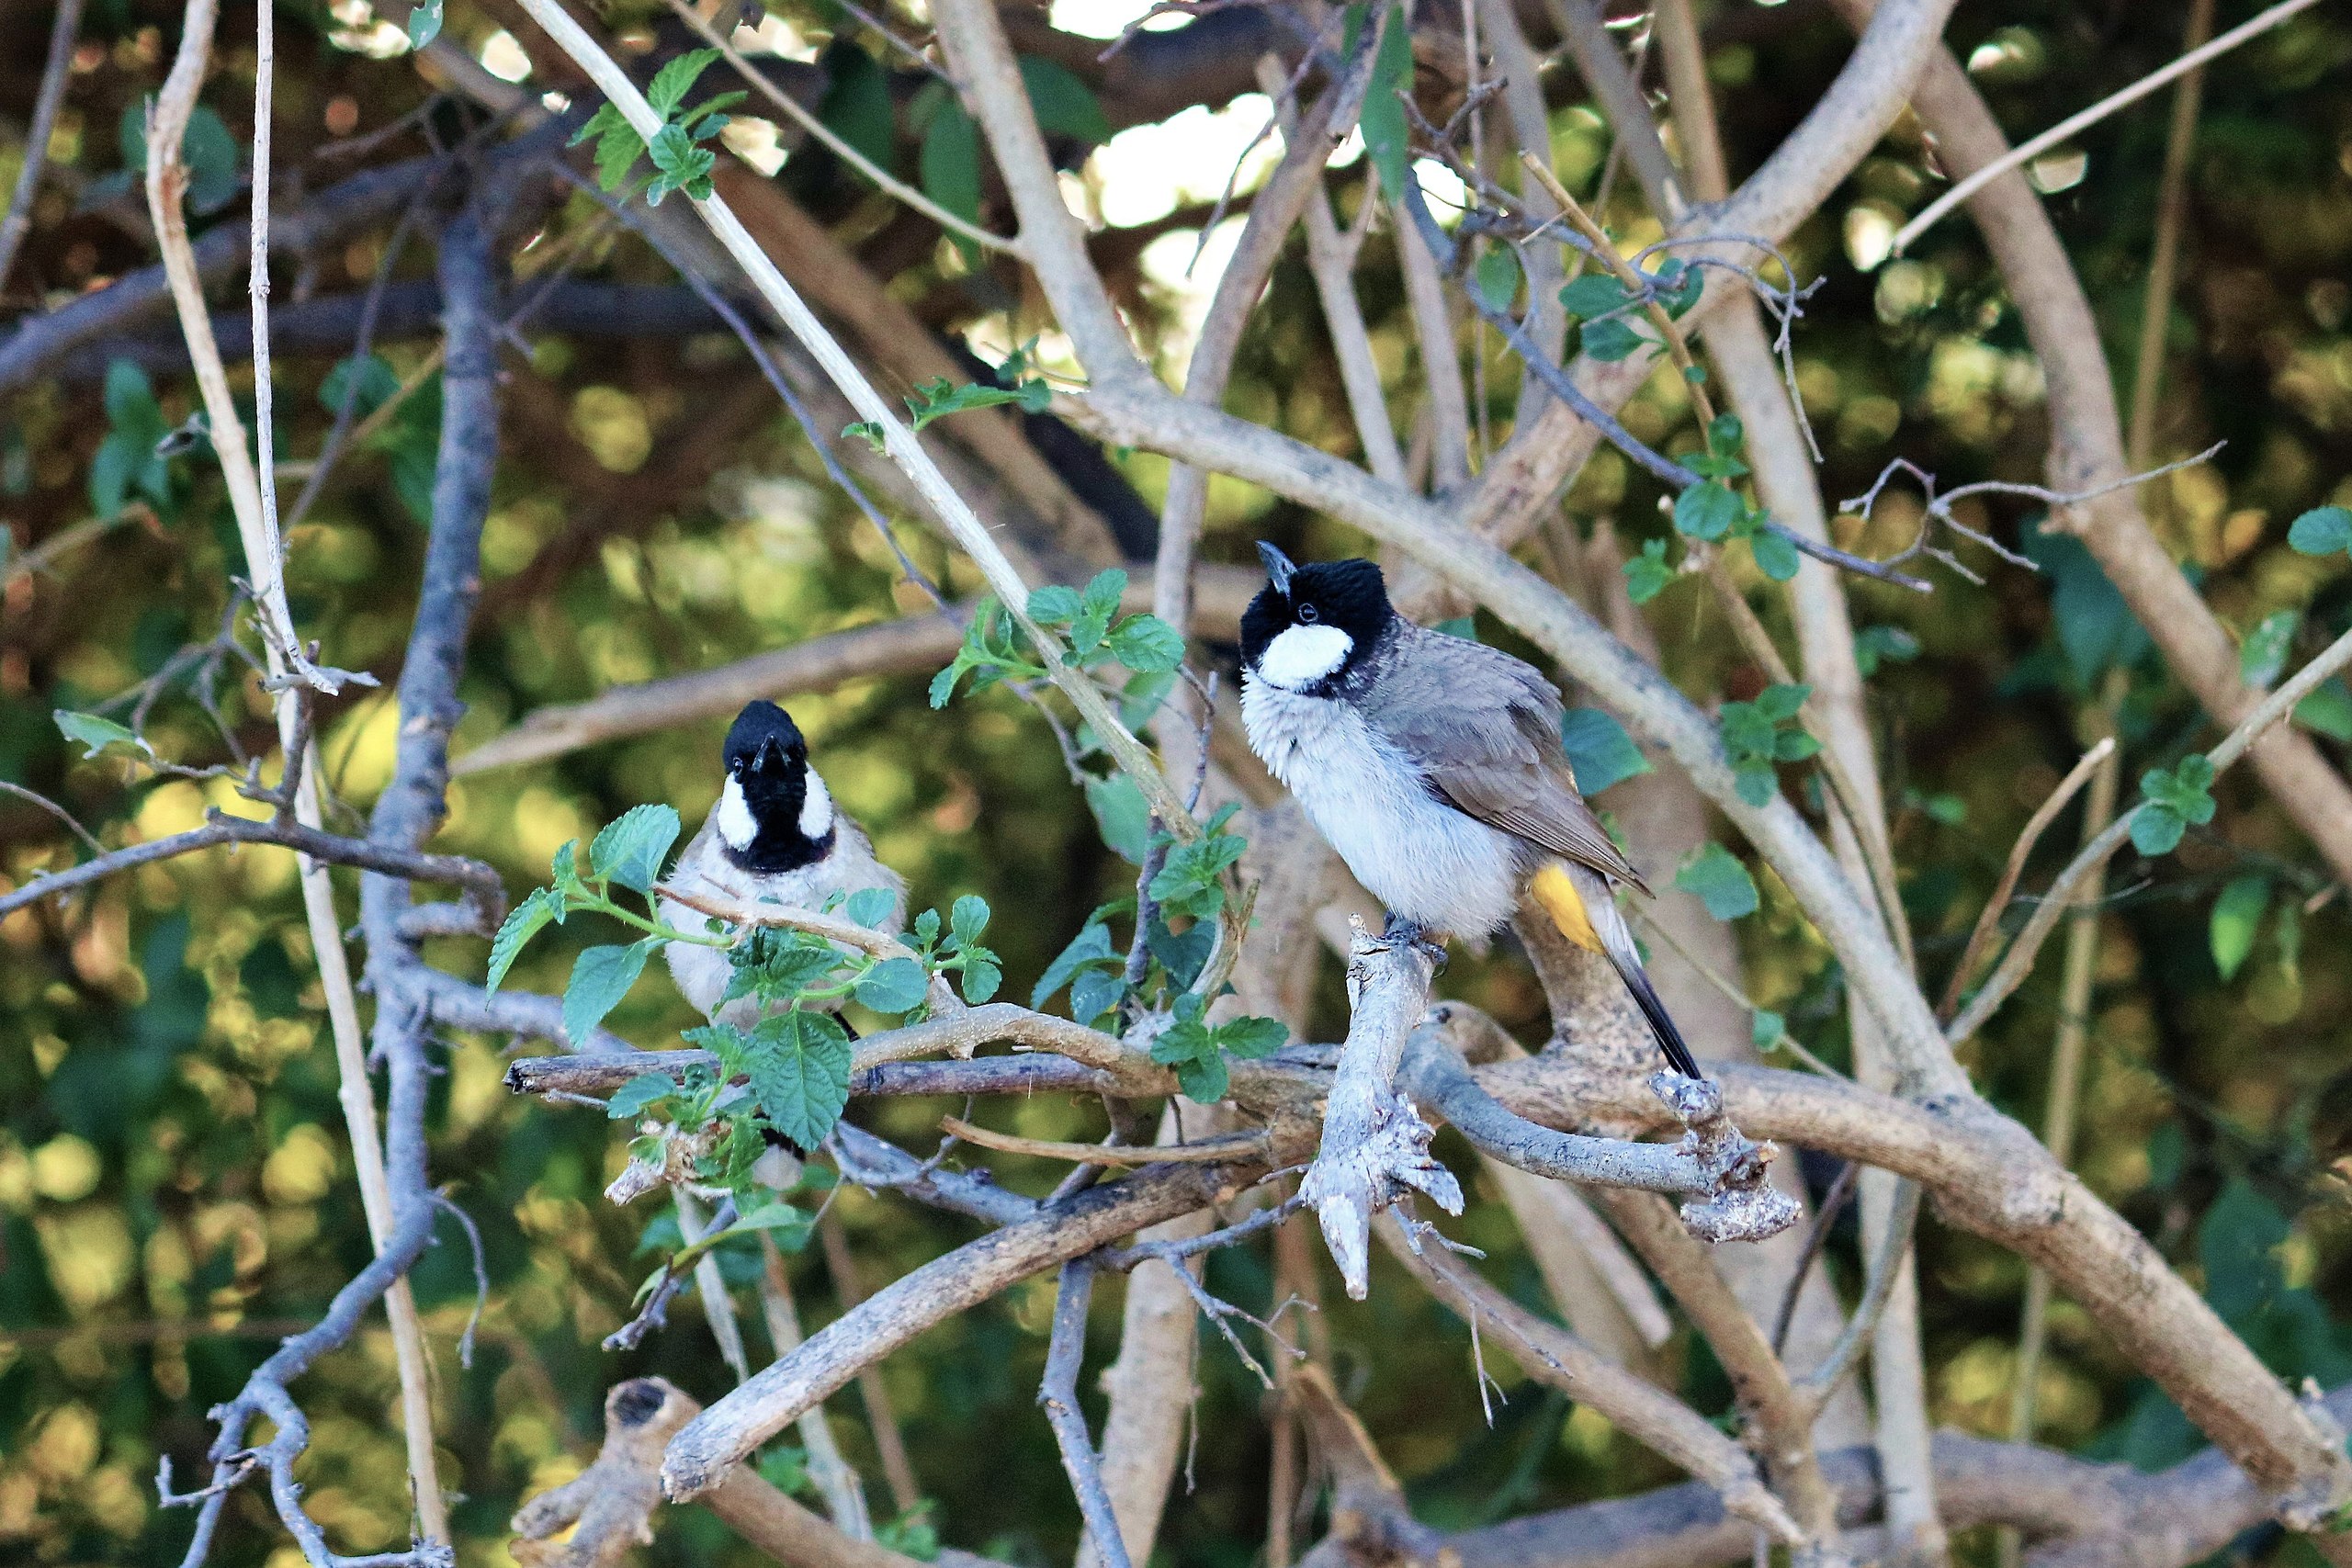 File:Pair of birds in Keoladeo Ghana National Park  - Wikimedia Commons